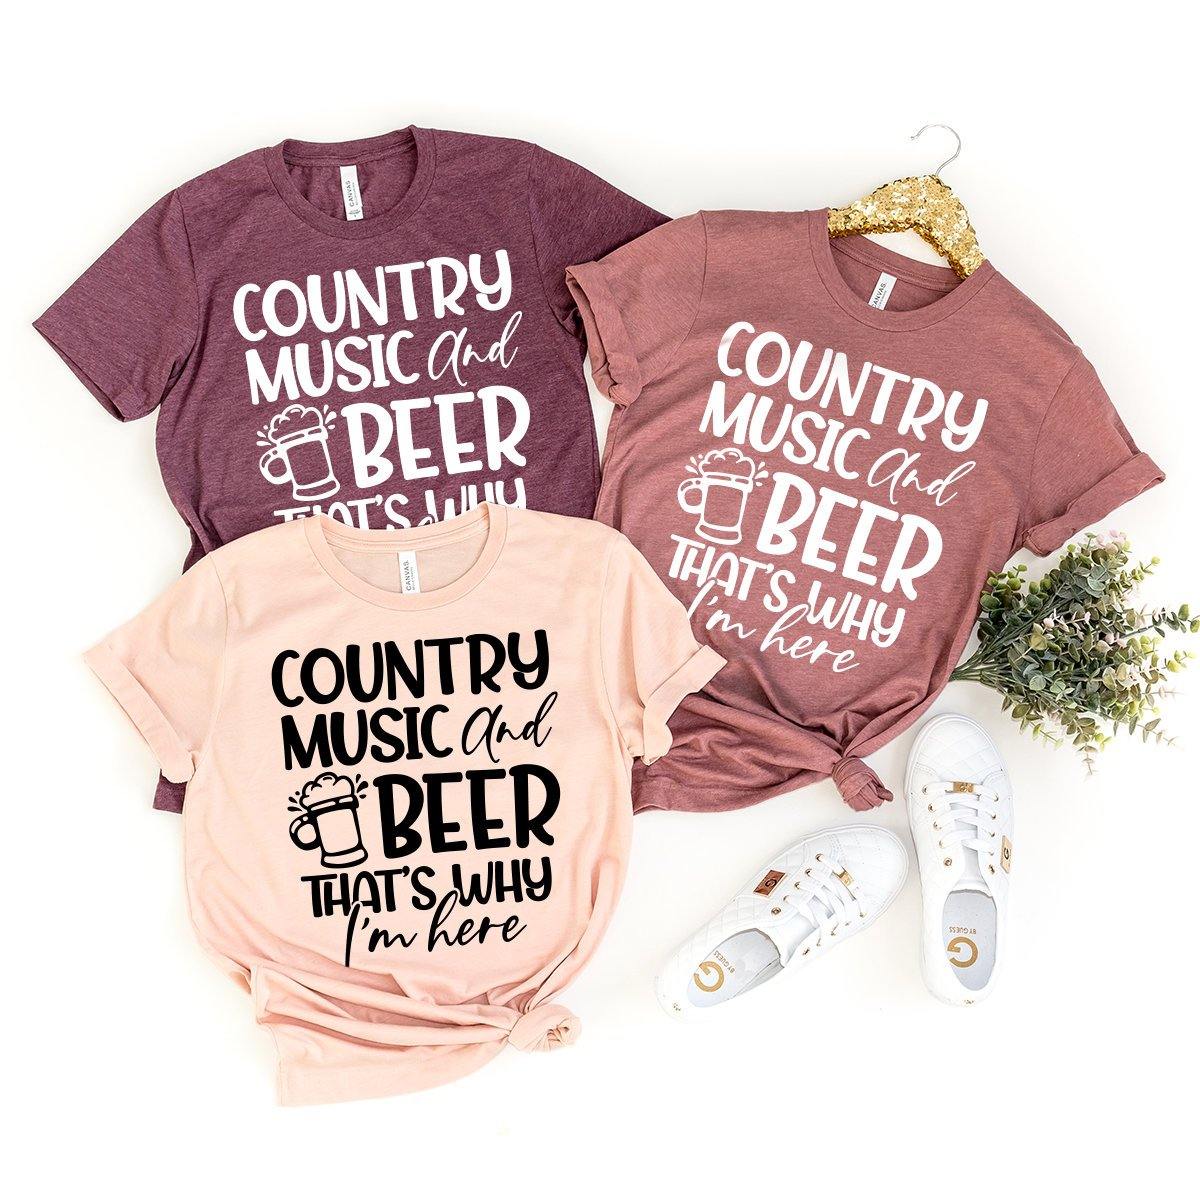 Country Music Festival Shirt, Country Music And Beer That's Why I Am Hear Shirt, Country Girl Shirt, Country Women Shirt, Southern Life Tee - Fastdeliverytees.com